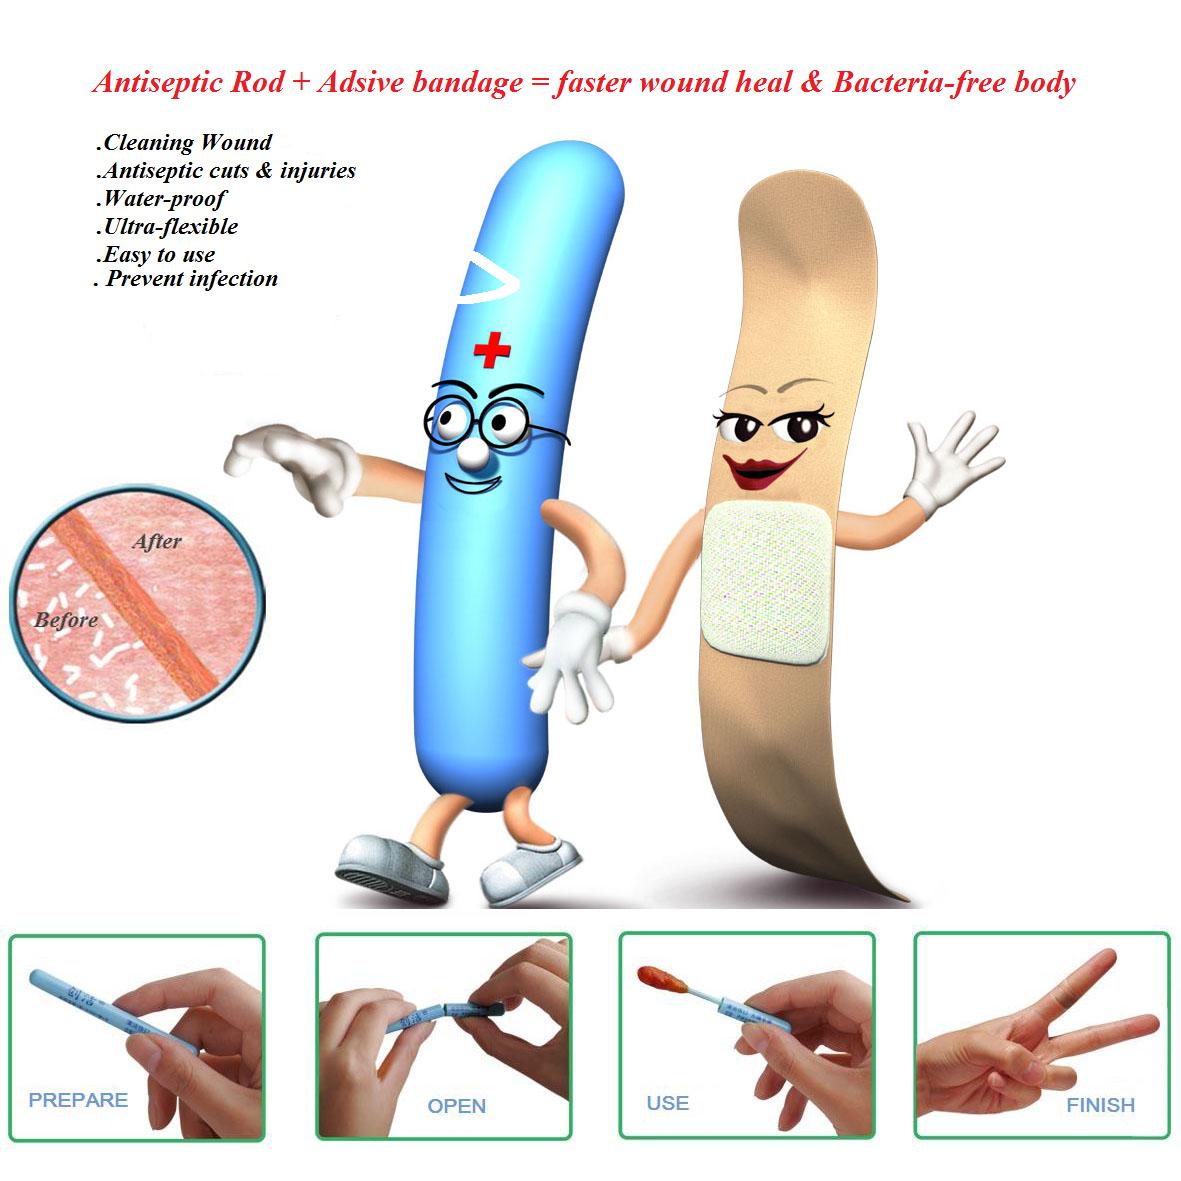 Clip Arts Related To : wound care clip art. 